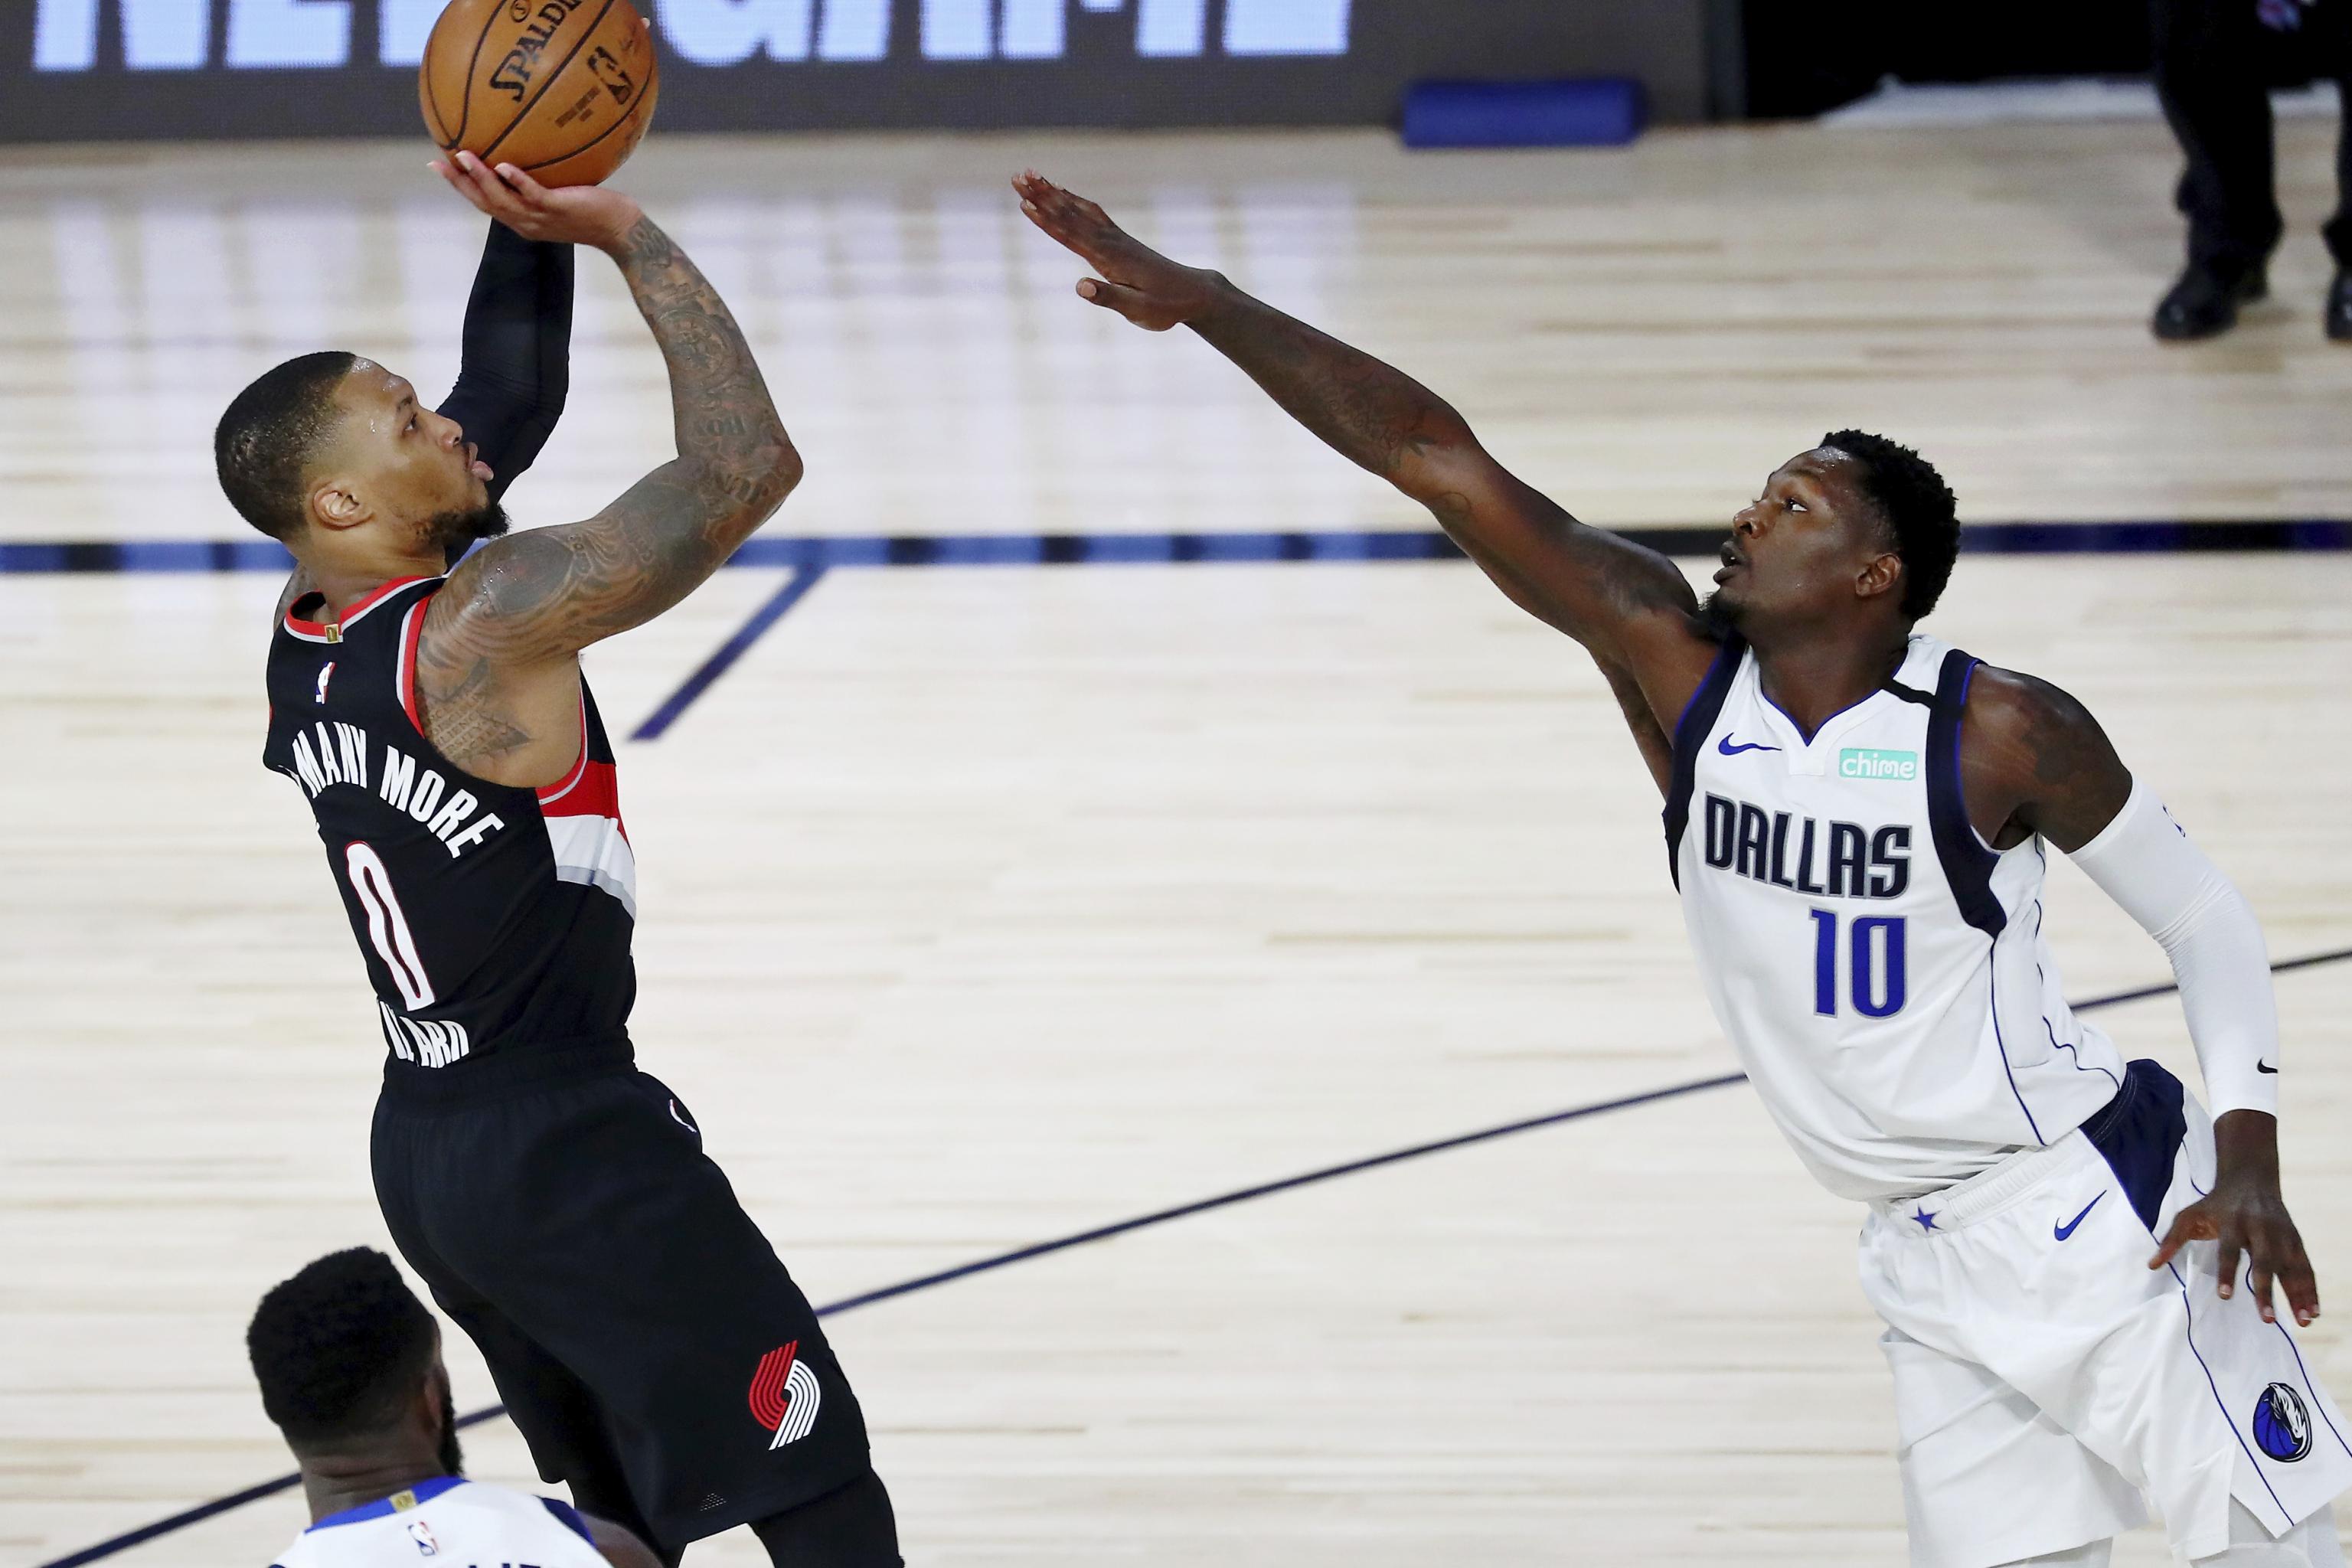 Nba Playoffs 2020 Grizzlies Vs Blazers Play In Game Schedule Live Stream Bleacher Report Latest News Videos And Highlights